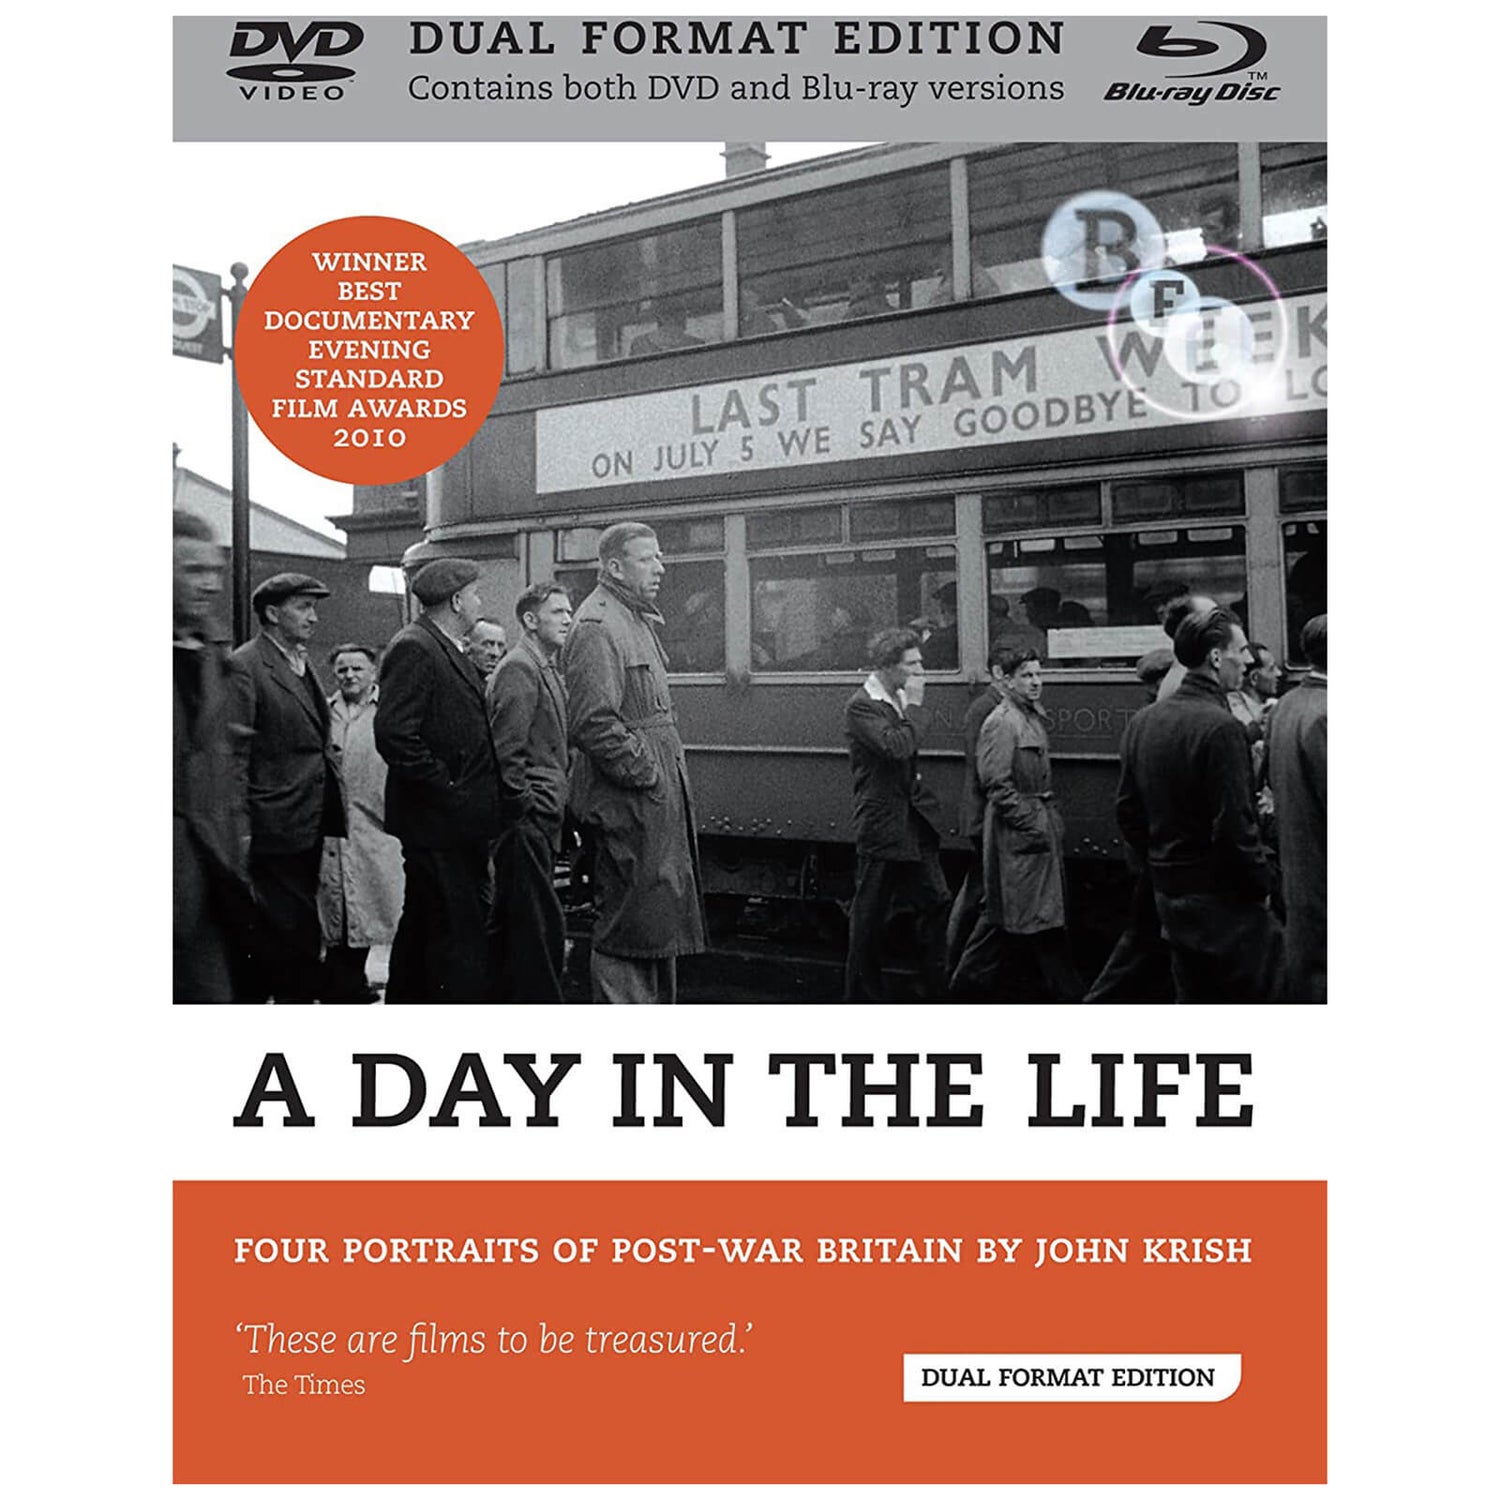 A Day in the Life: Four Portraits of Post-war Britain by John Krish (DVD and Blu-Ray)